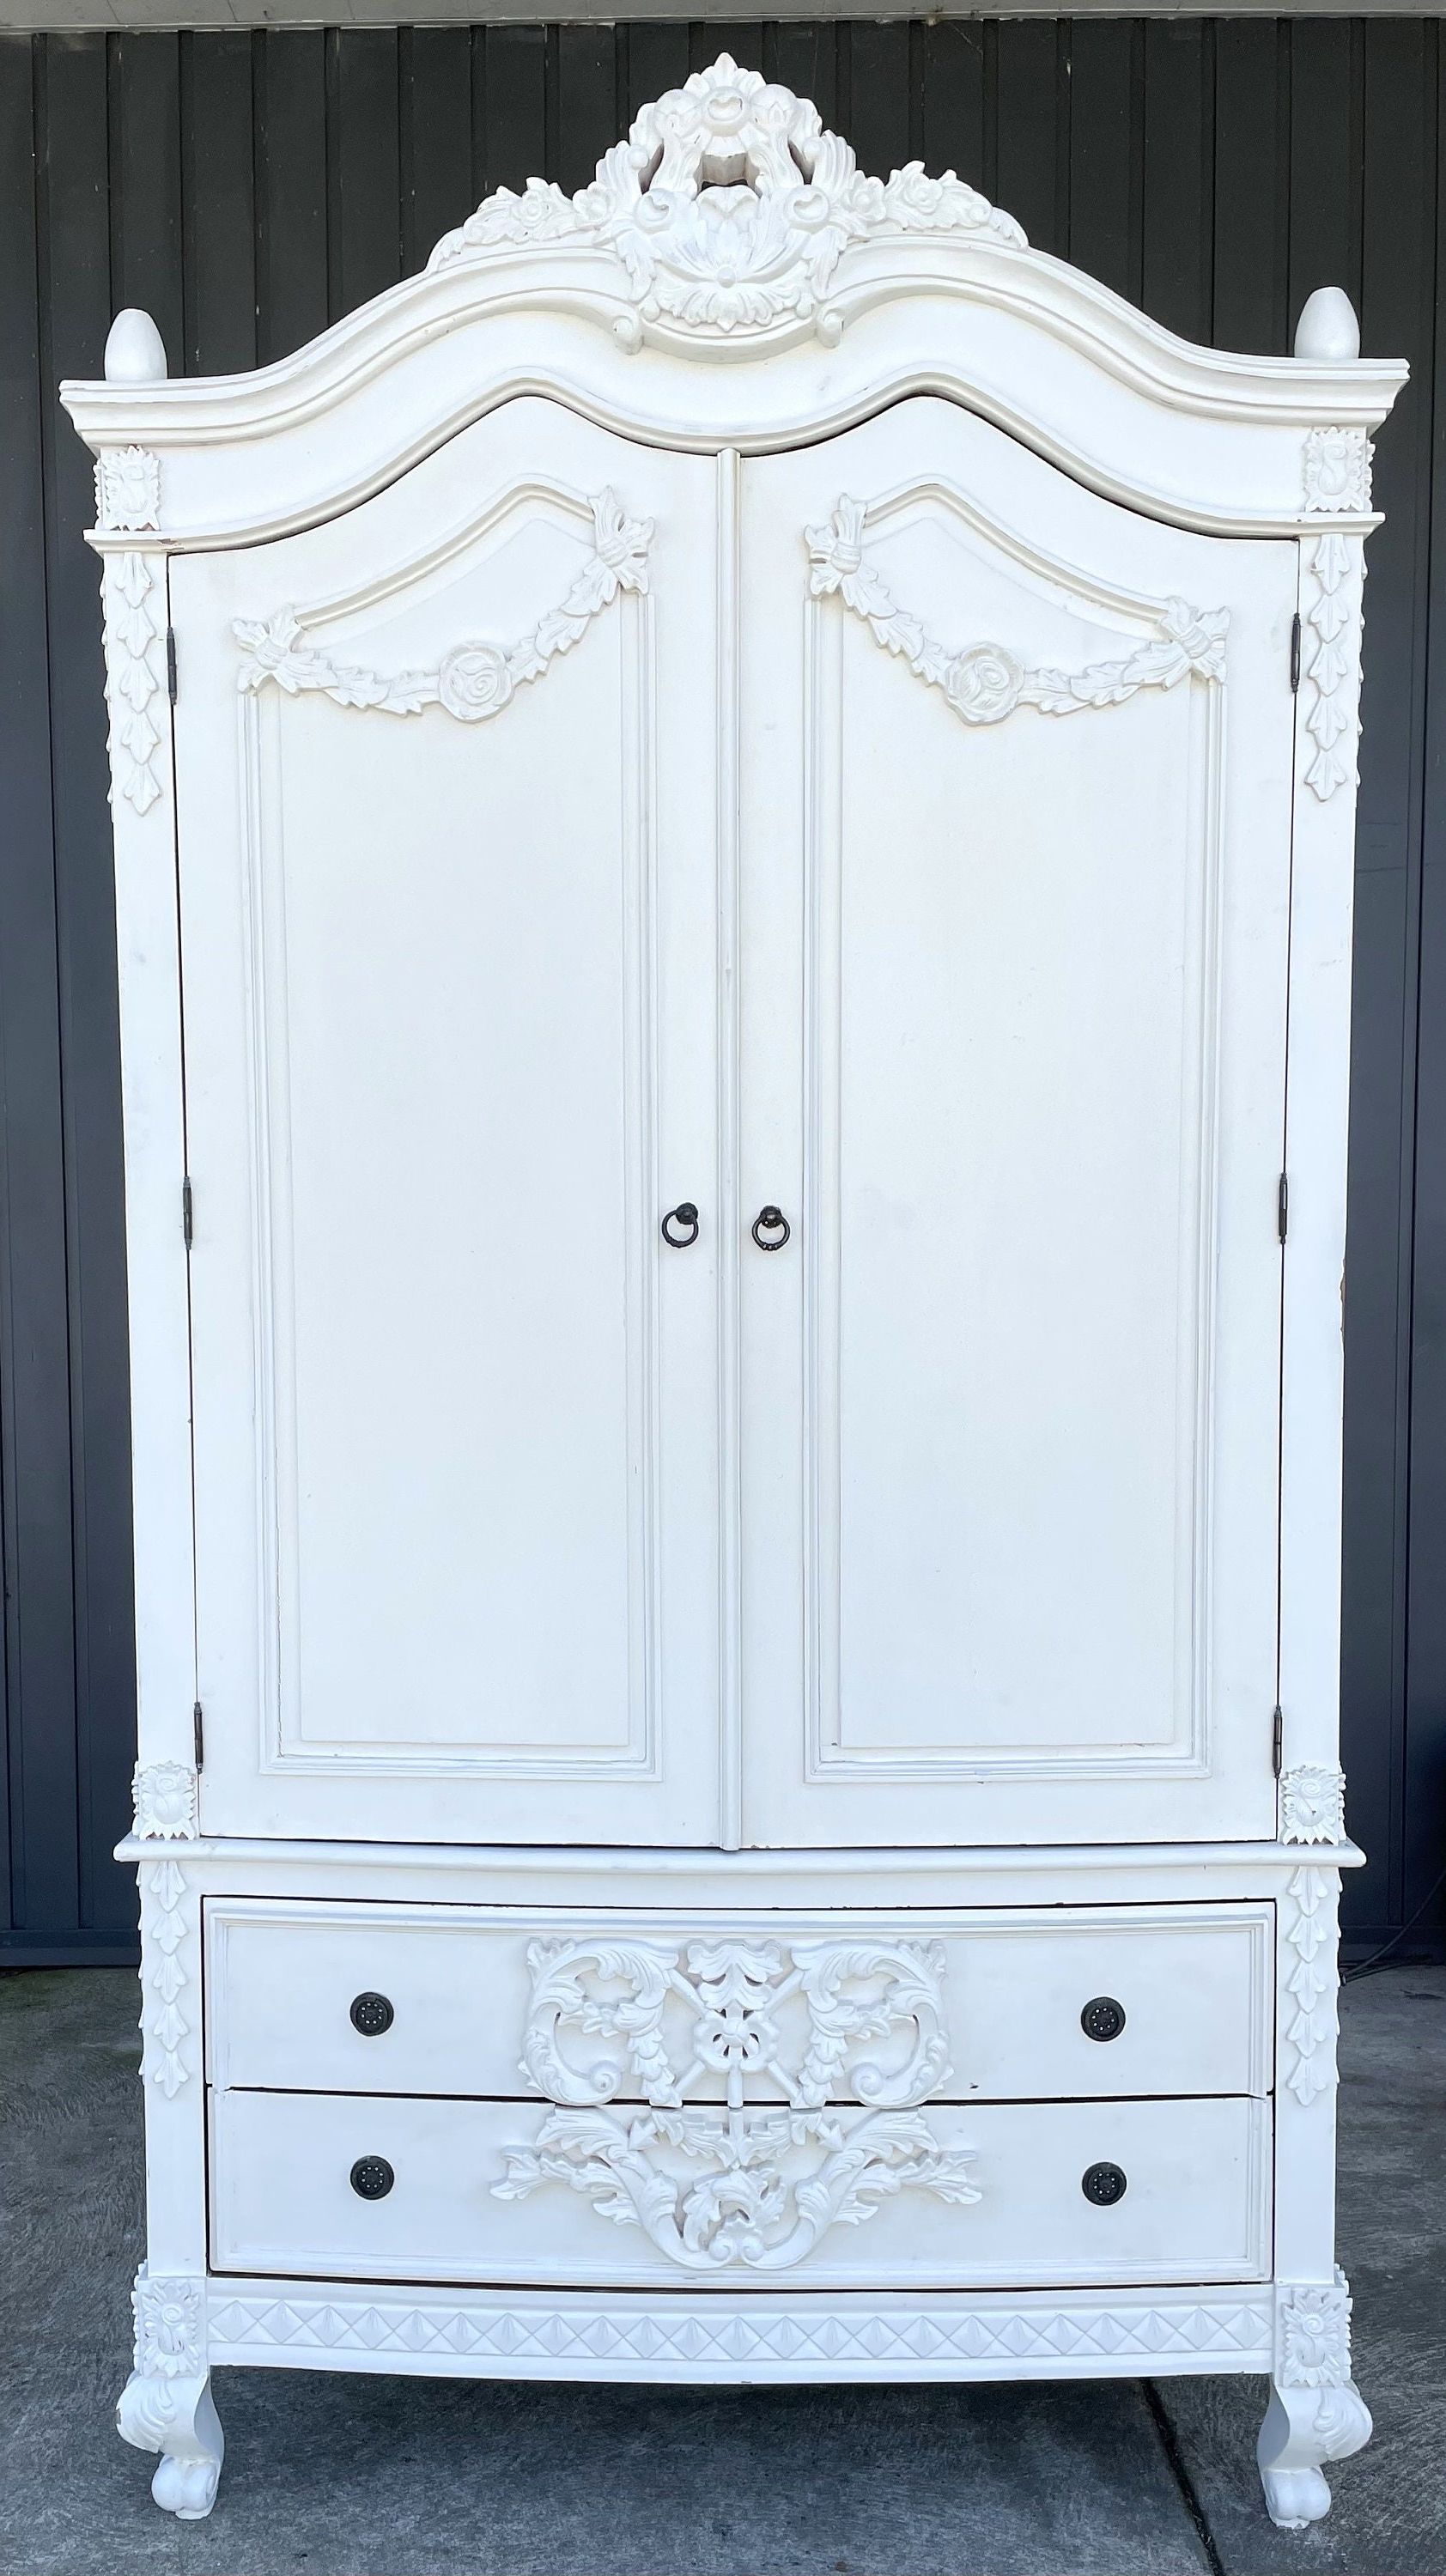 Shabby Chic Distressed White Vintage Style French Baroque – Etsy Regarding Shabby Chic White Wardrobes (View 6 of 20)